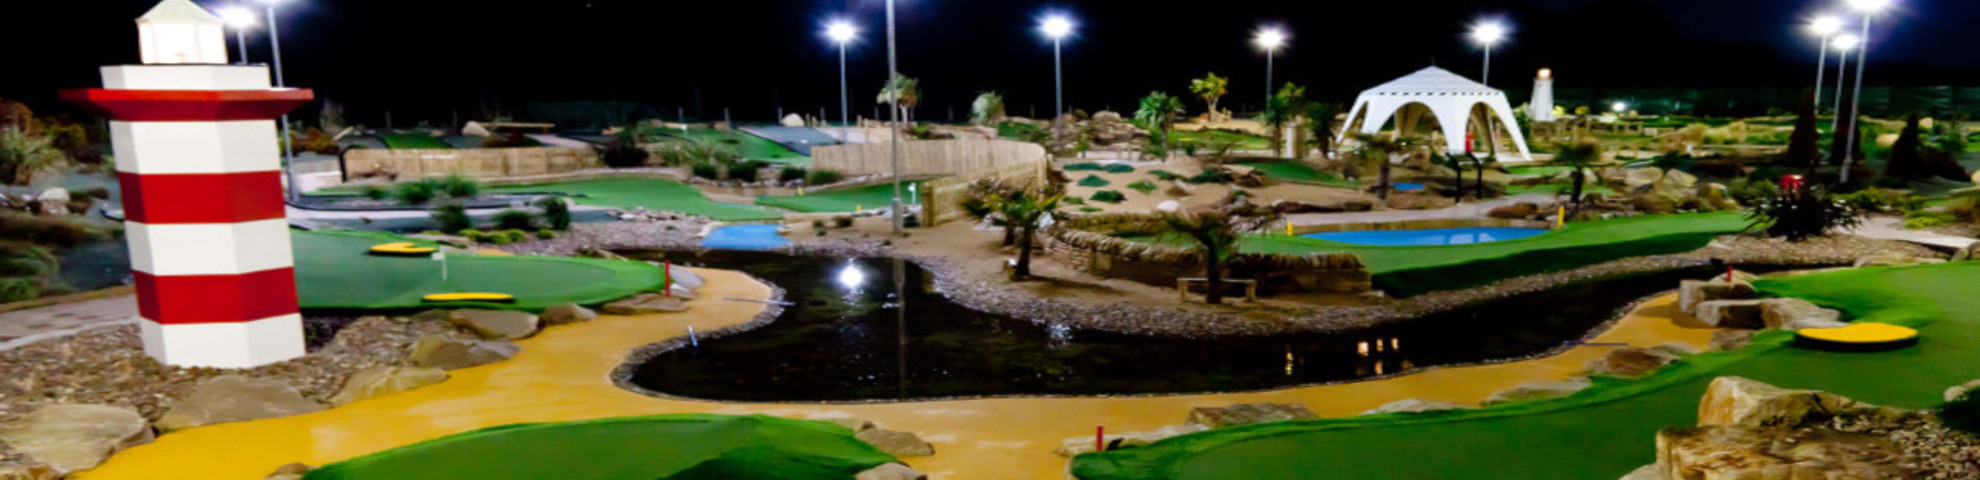 An outdoor children's golf course at night time.